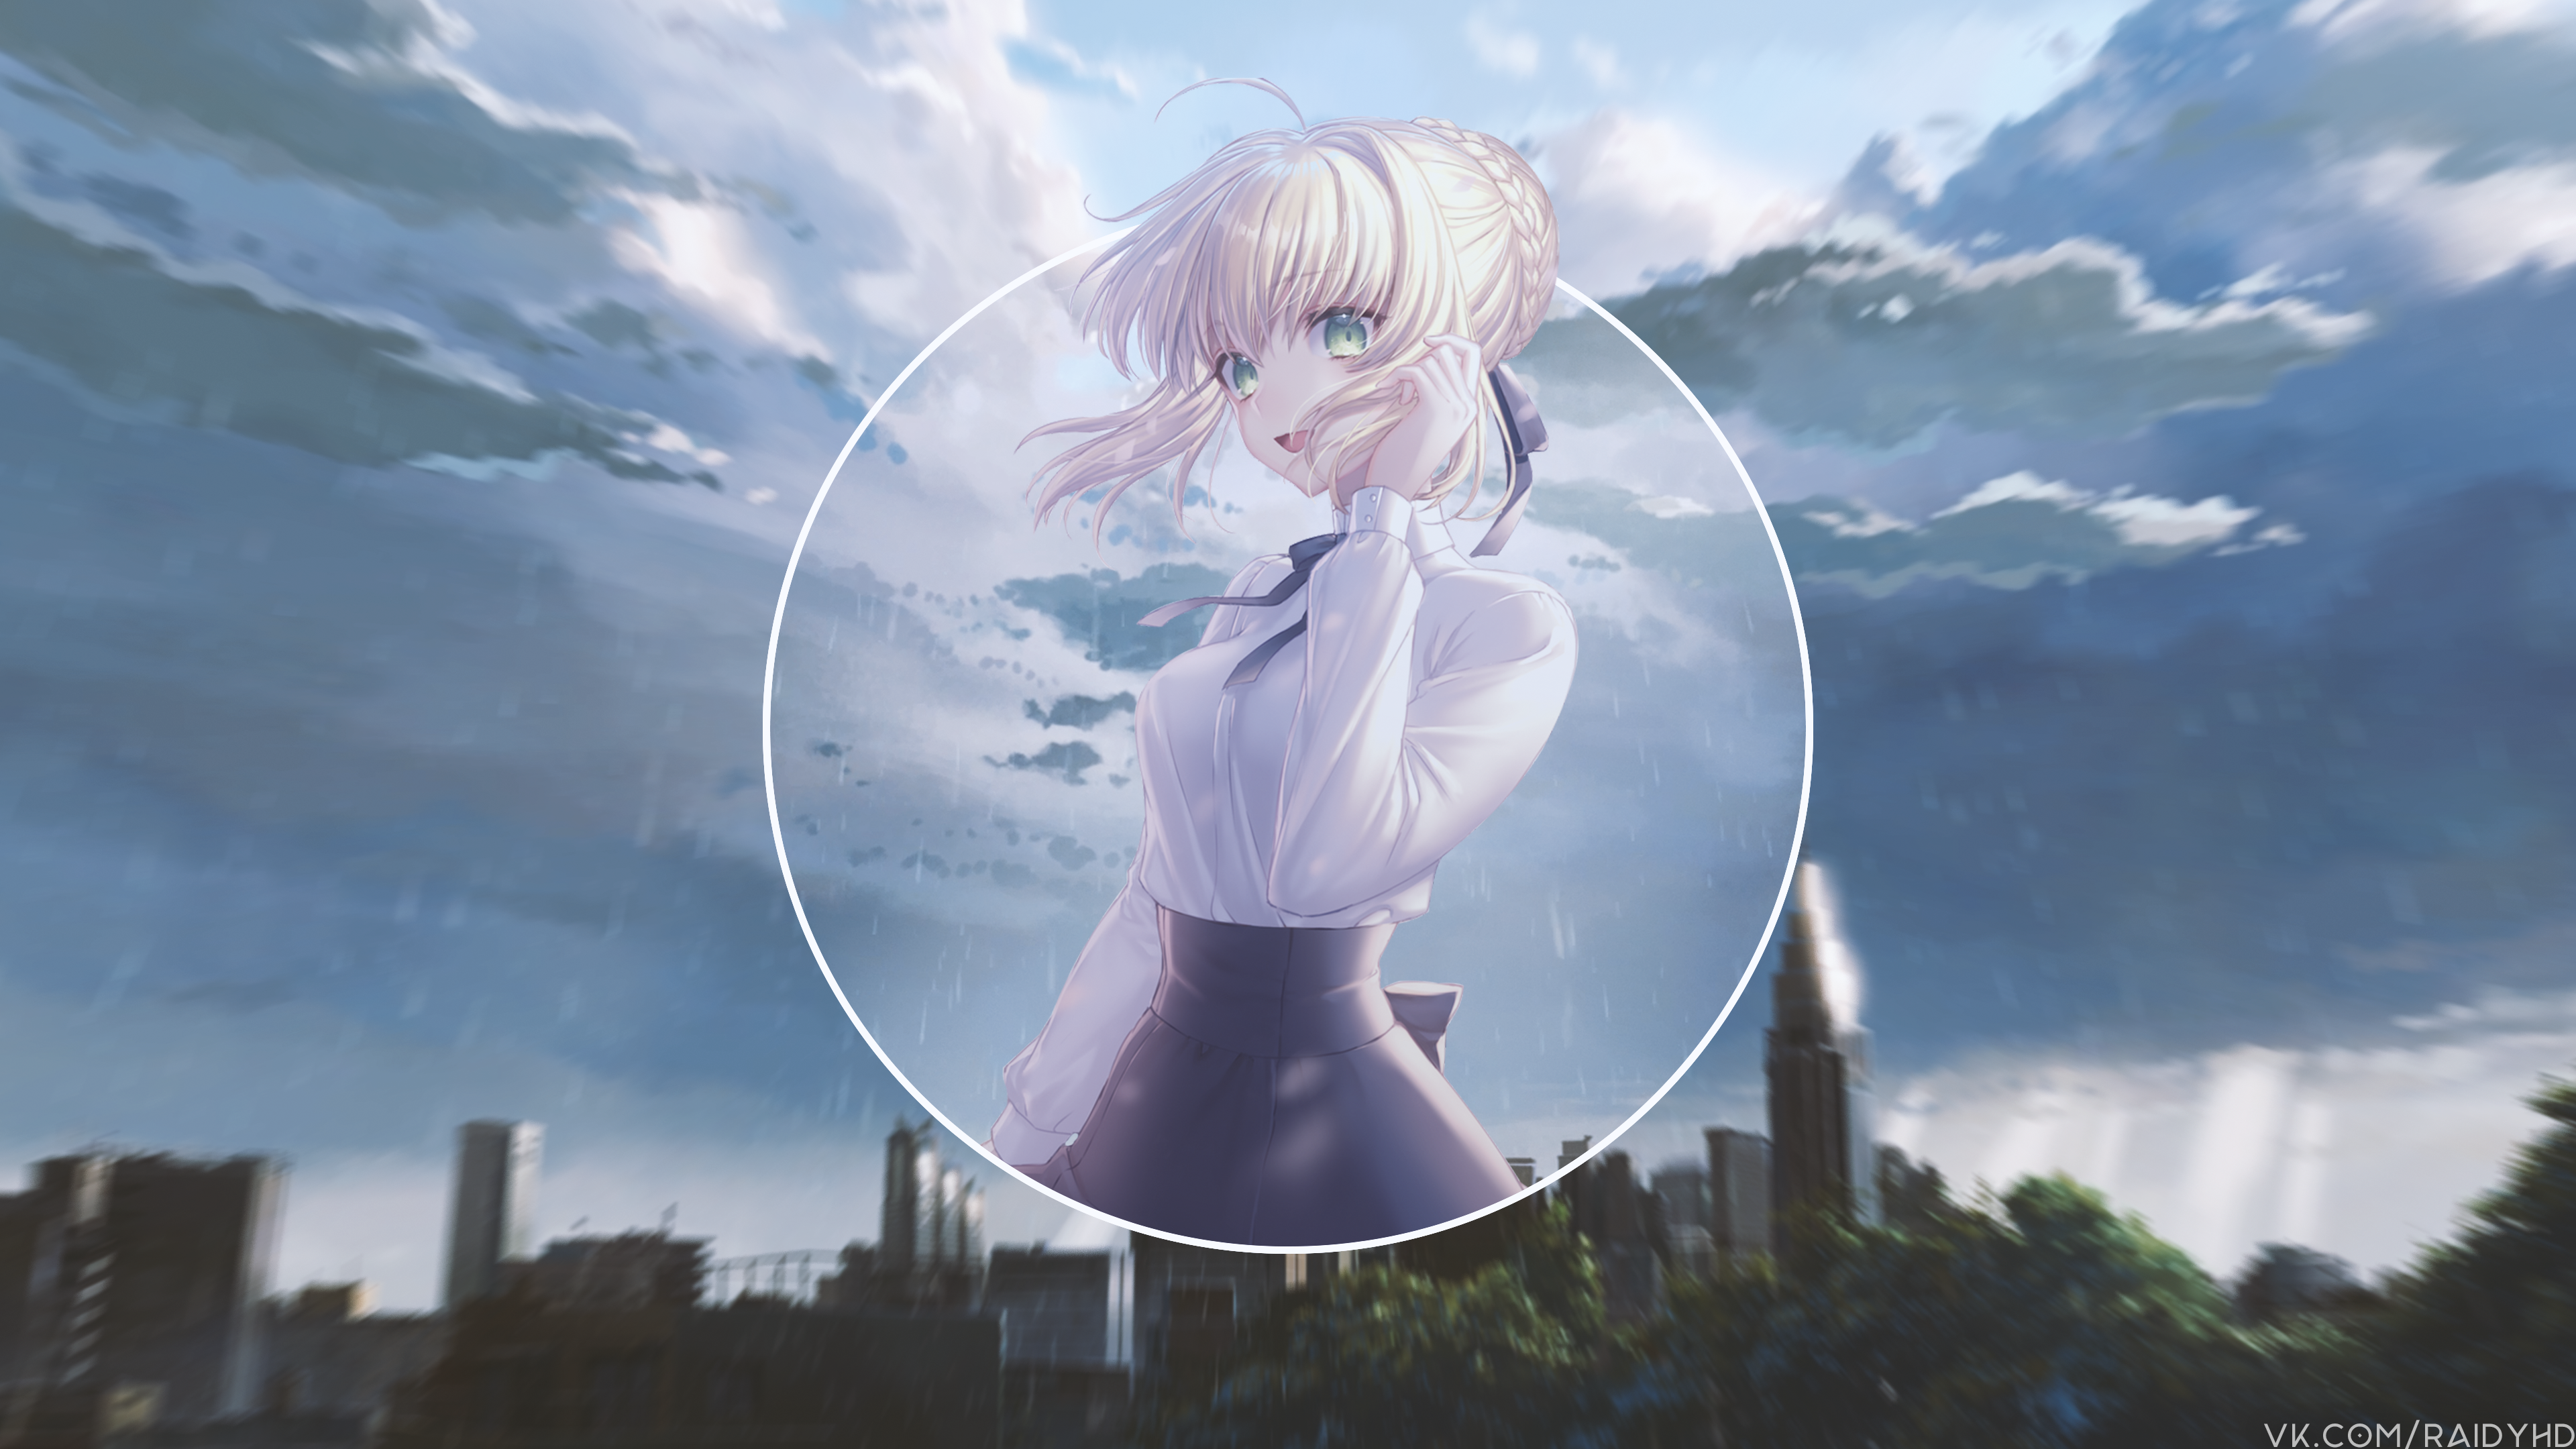 Anime 3840x2160 anime girls anime picture-in-picture Fate series Saber Artoria Pendragon watermarked